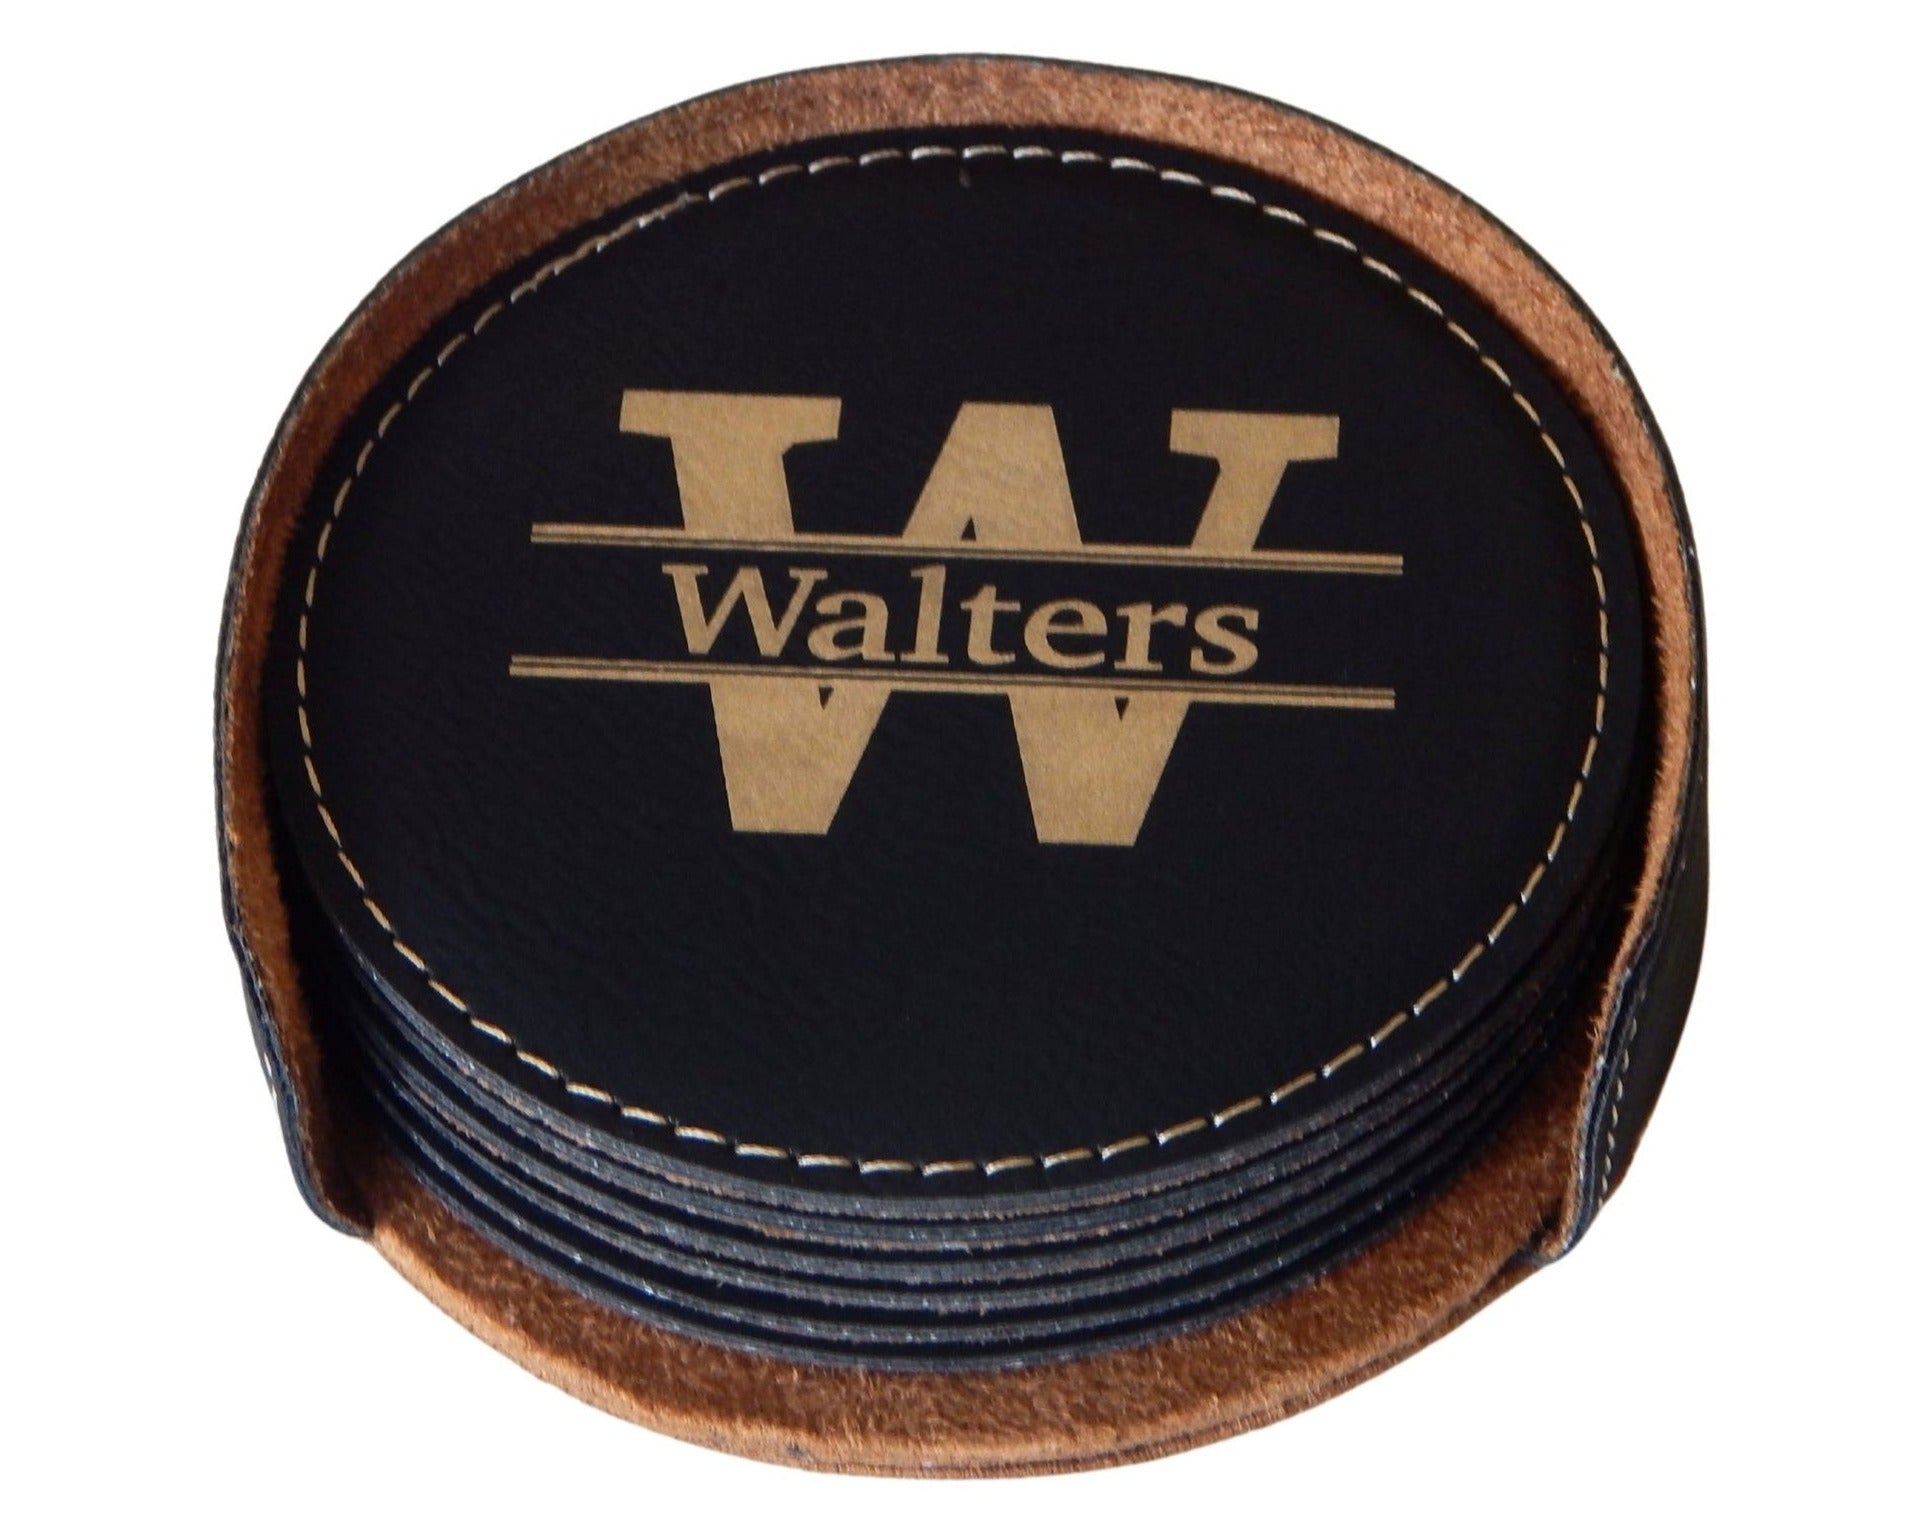 New Home Housewarming Gift | Personalized Gift for Couple | Leather Coasters